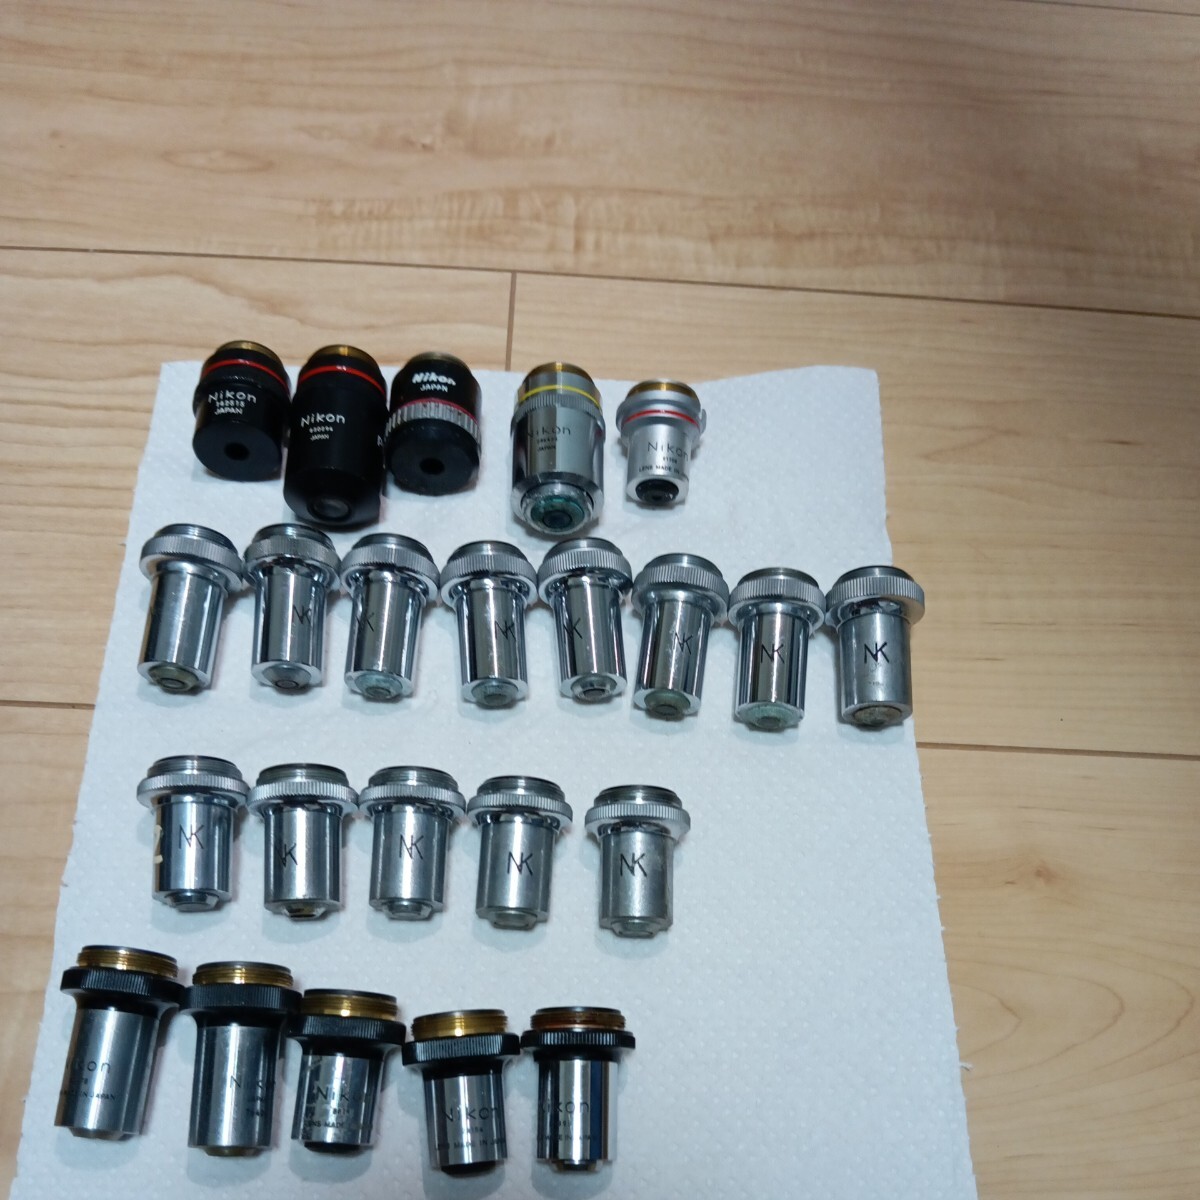  Nikon Nikon microscope against thing lens 23 piece together present condition goods 